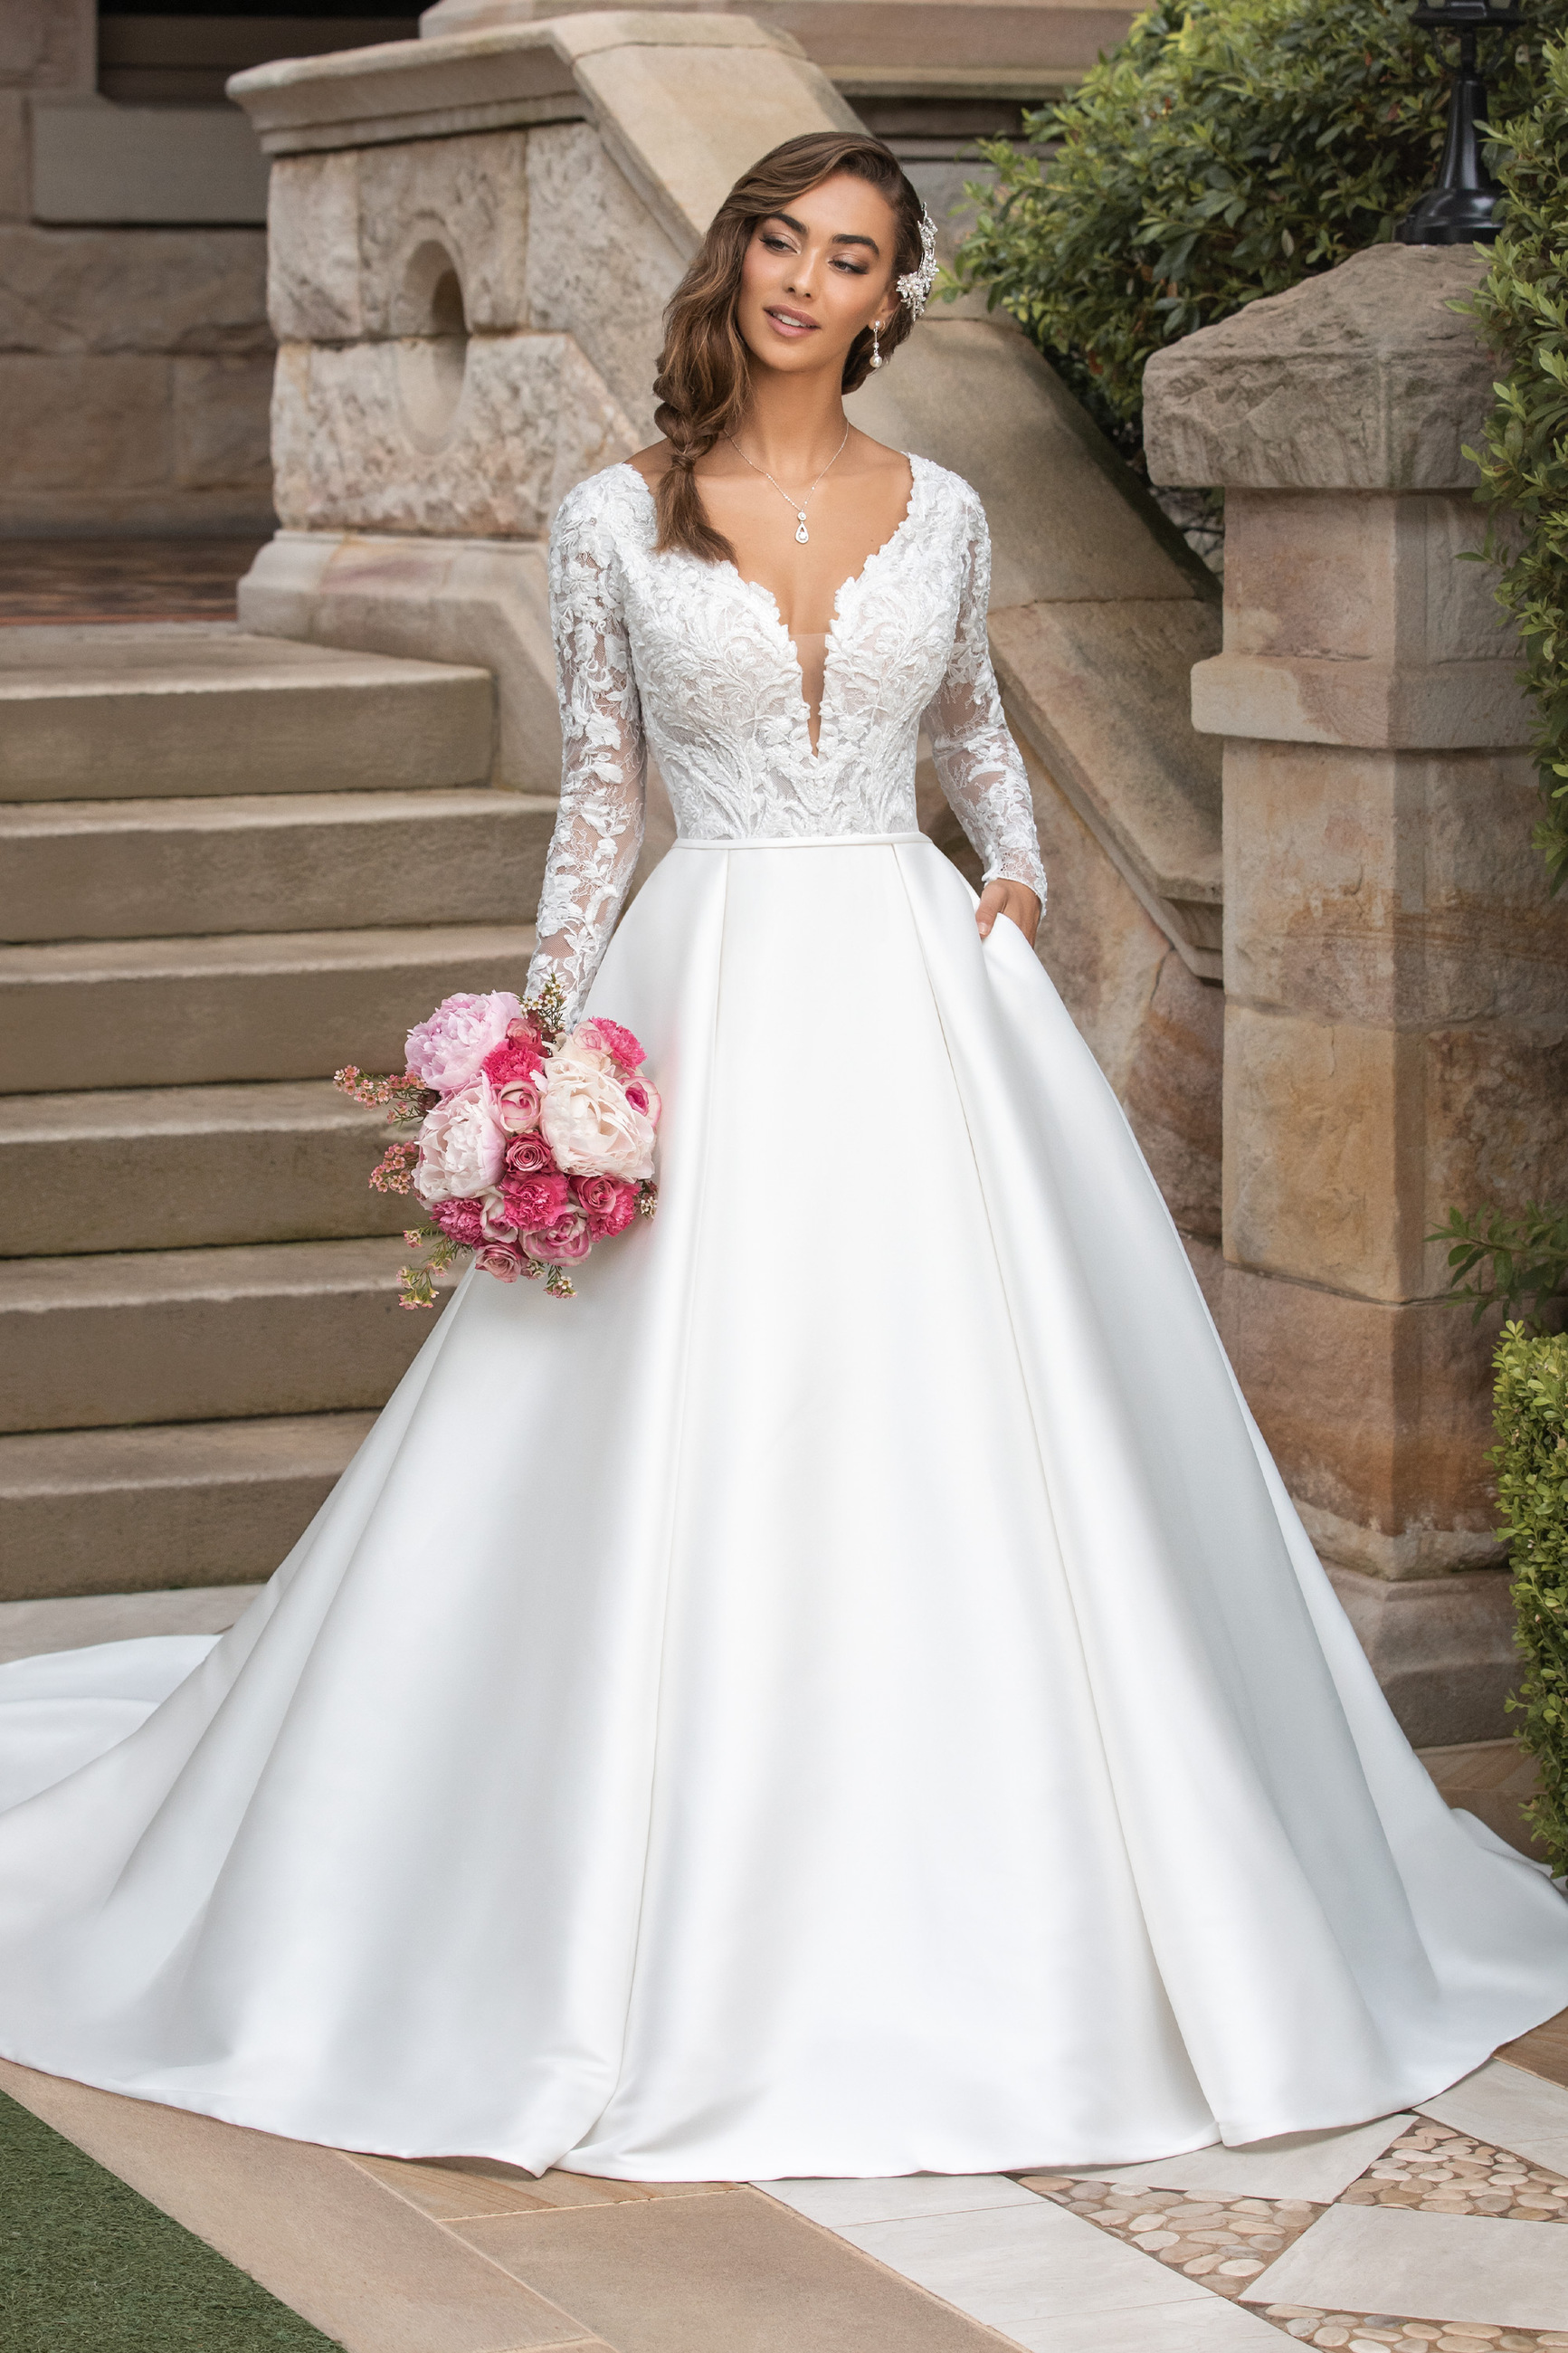 Dreamy Winter Wedding Dress with Lace Sleeves